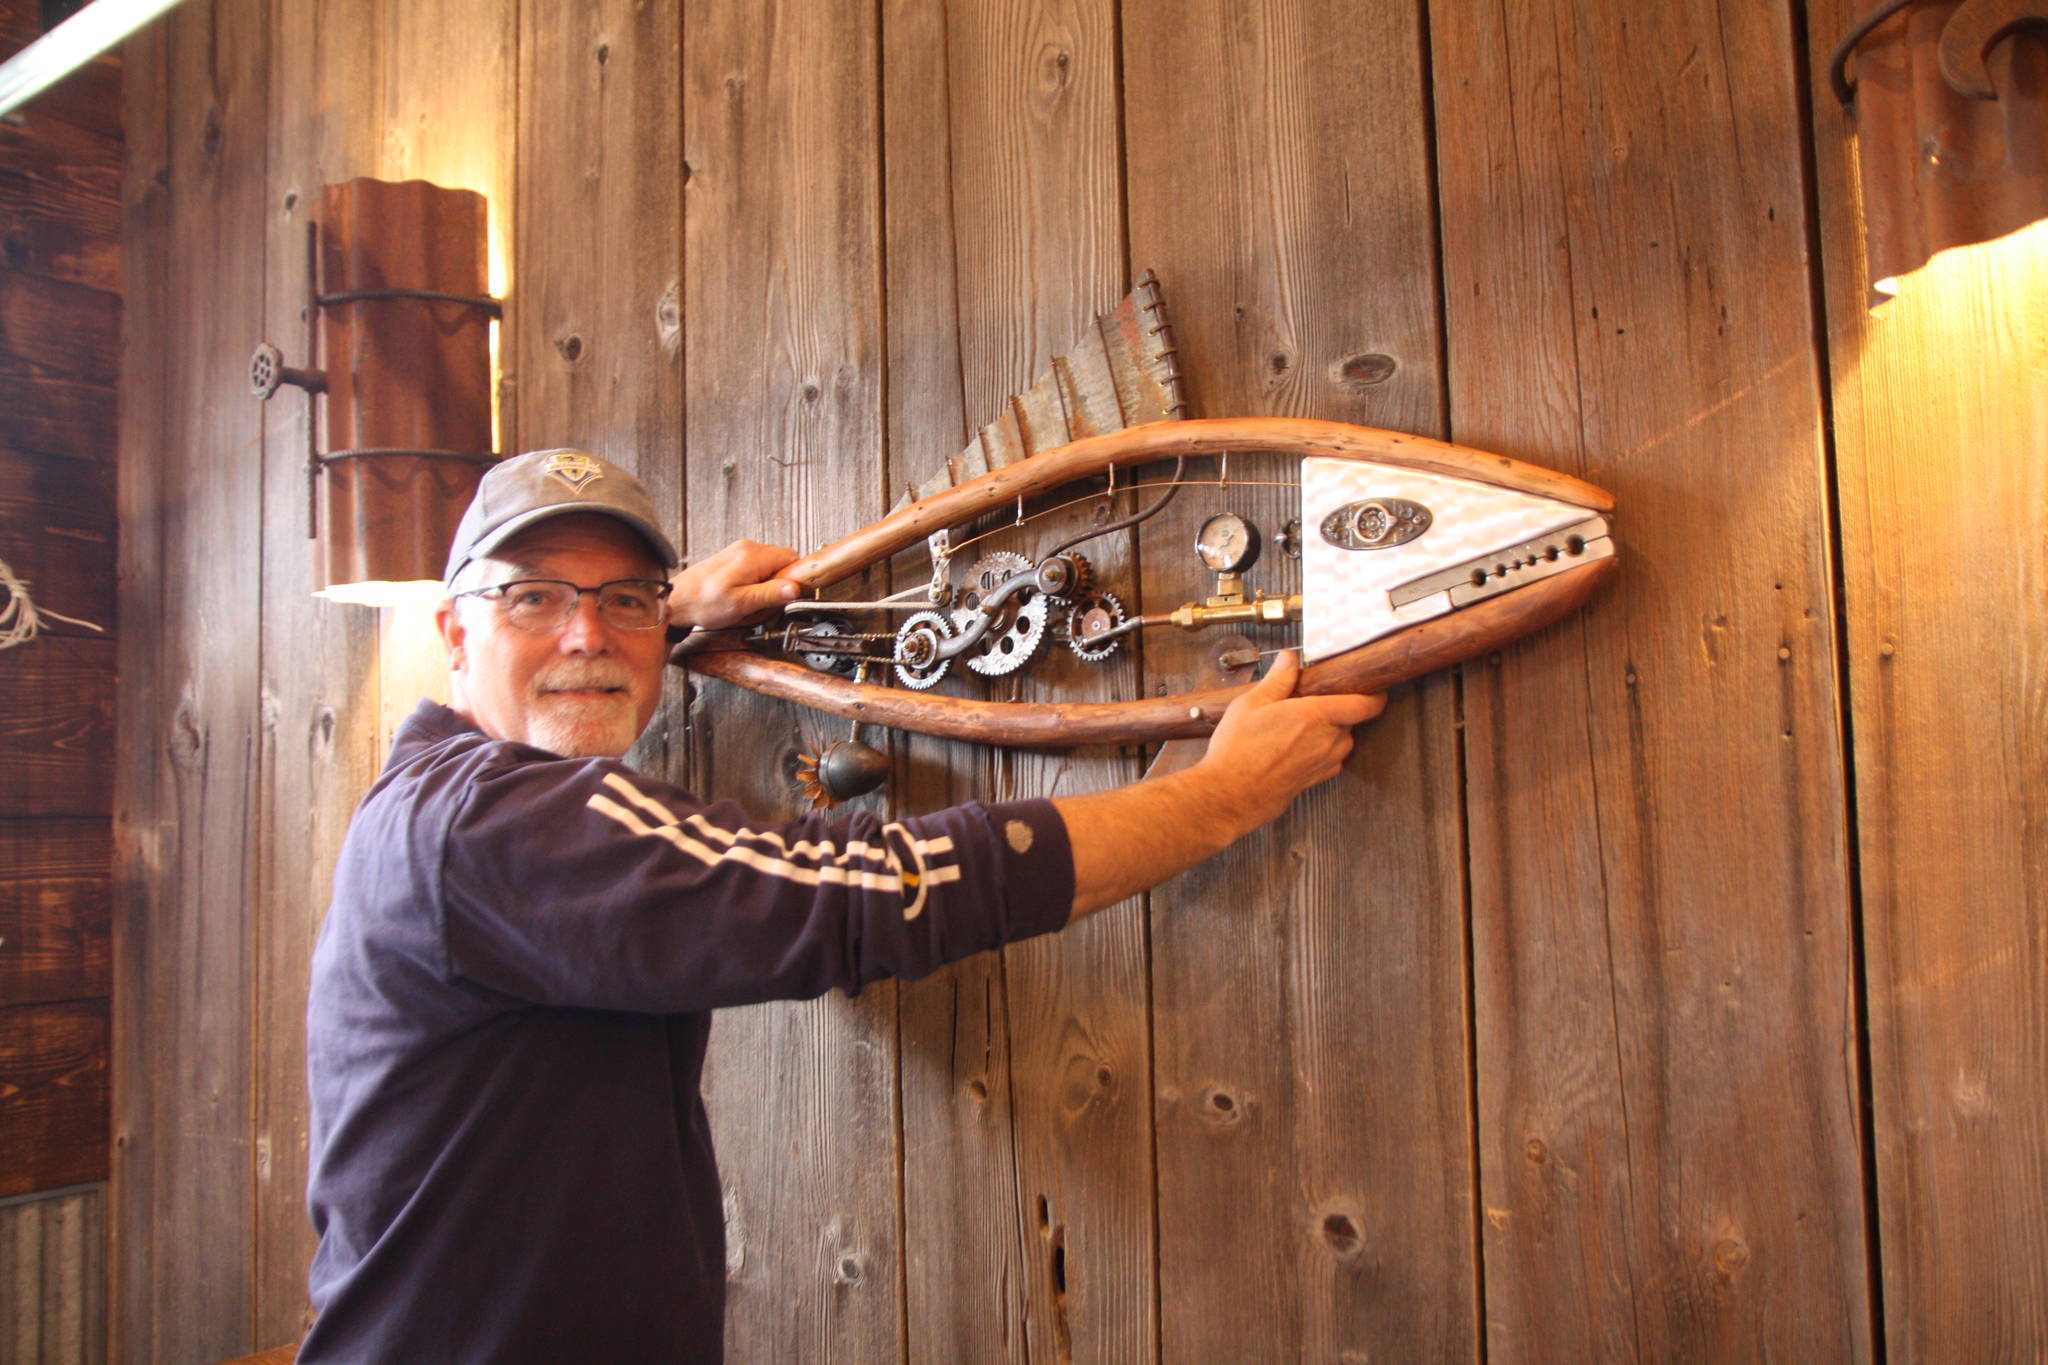 Artist Mark Wacker hangs a fish ornament he created for the taproom barn. (Photo by Jessie Stensland/South Whidbey Record)